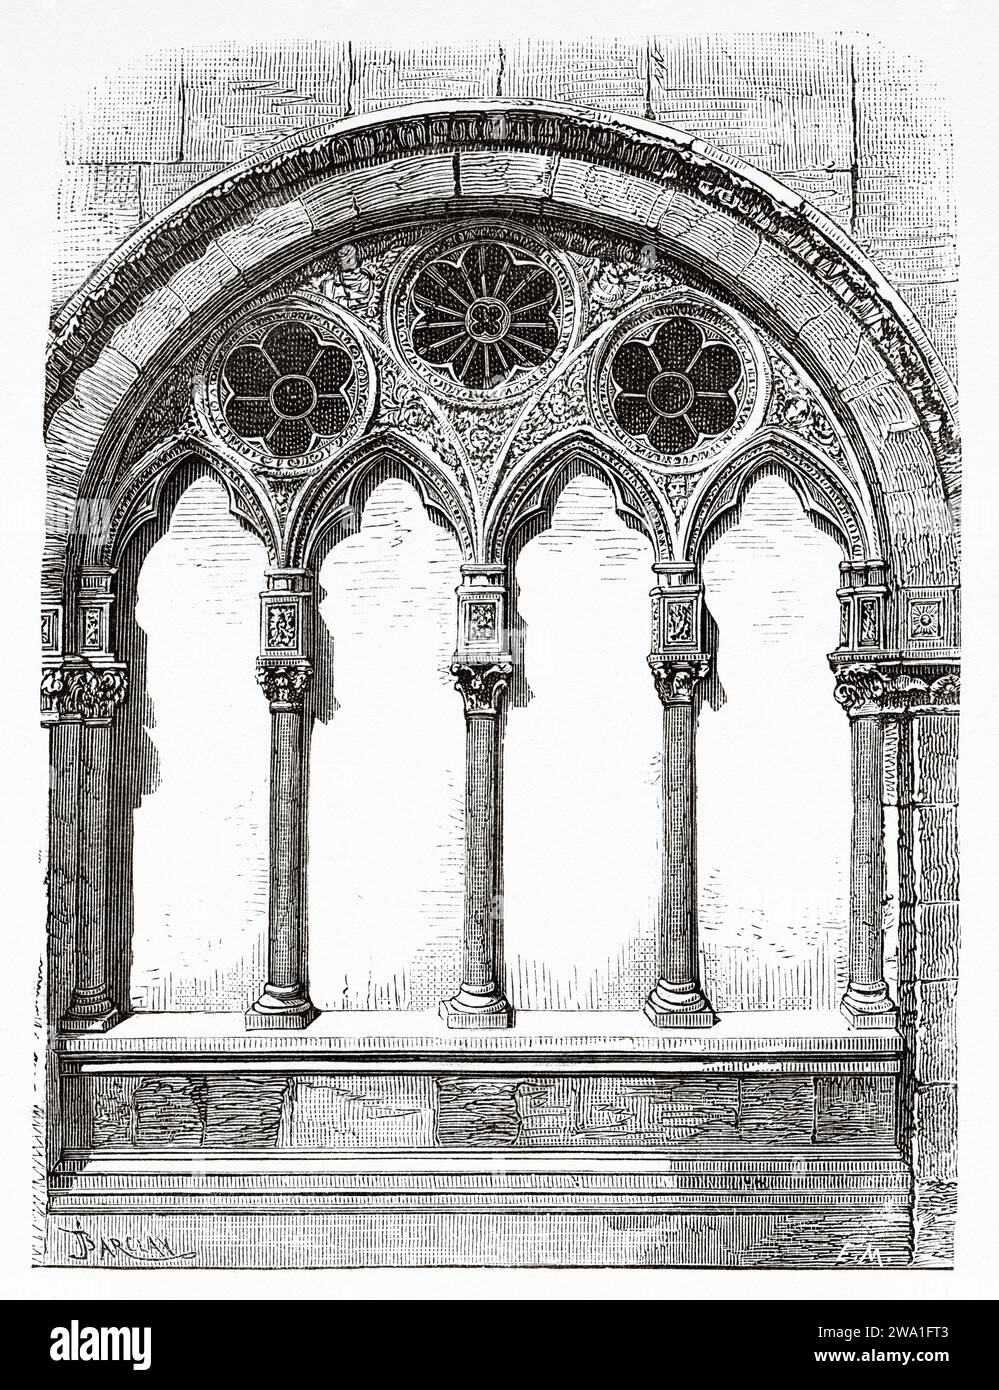 Oratory window of Santa Maria della Rosa church, Lucca. Tuscany, Central Italy. Europe. Small Towns and Great Art in Tuscany by Henri Belle (1837–1890) Old 19th century engraving from Le Tour du Monde 1880 Stock Photo